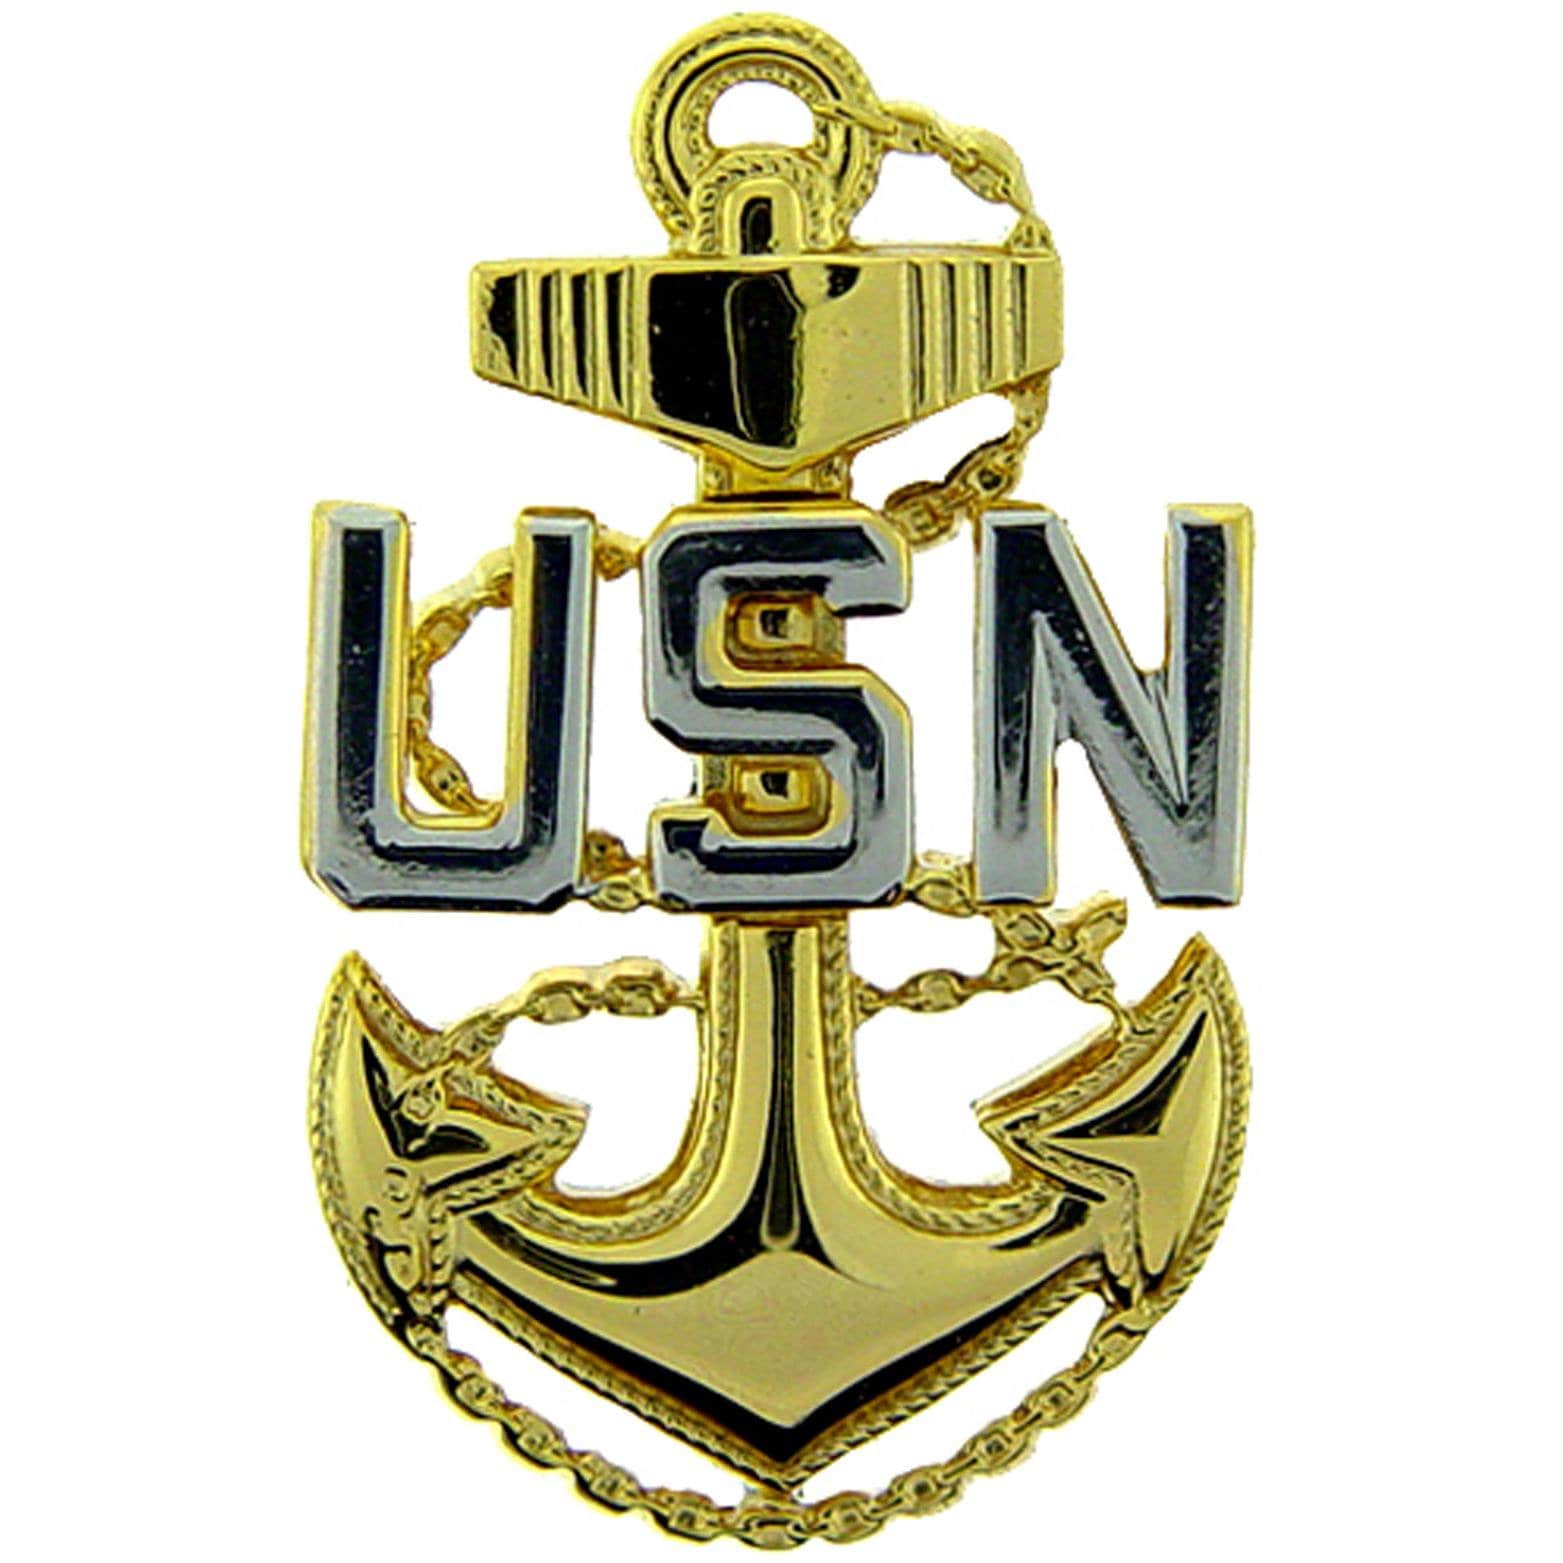 u-s-navy-usn-fouled-anchor-pin-gold-silver-plated-etsy